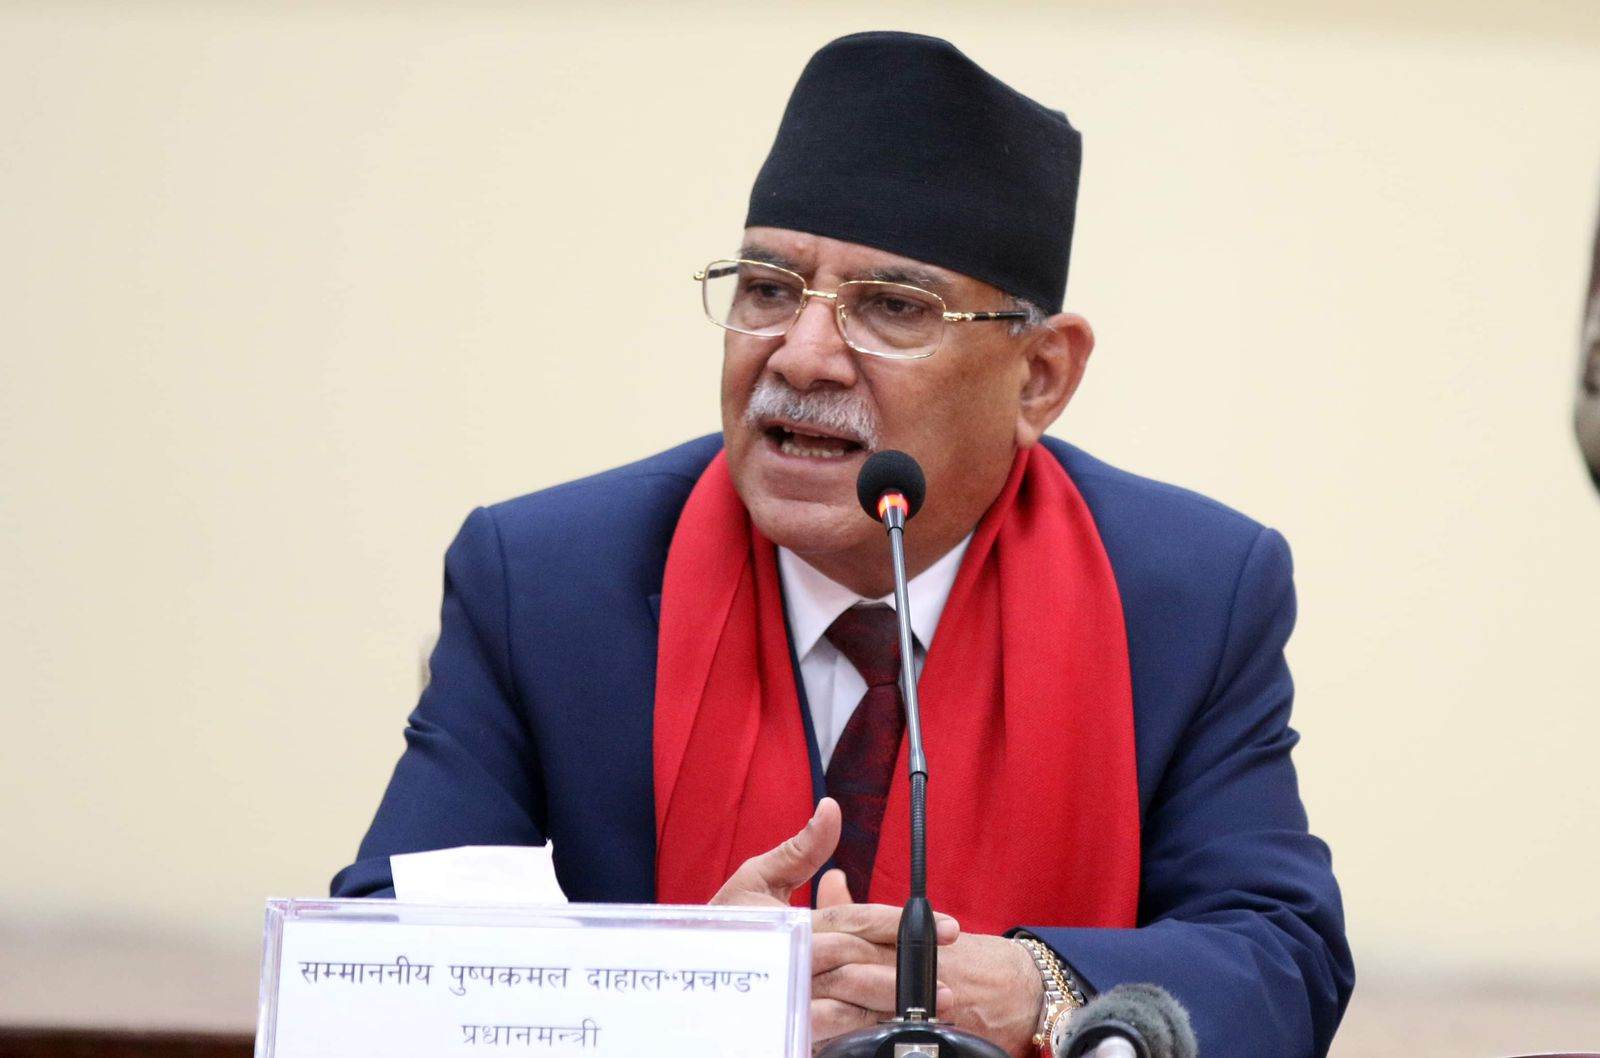 Government has policy of women empowerment and capacity development: PM Dahal